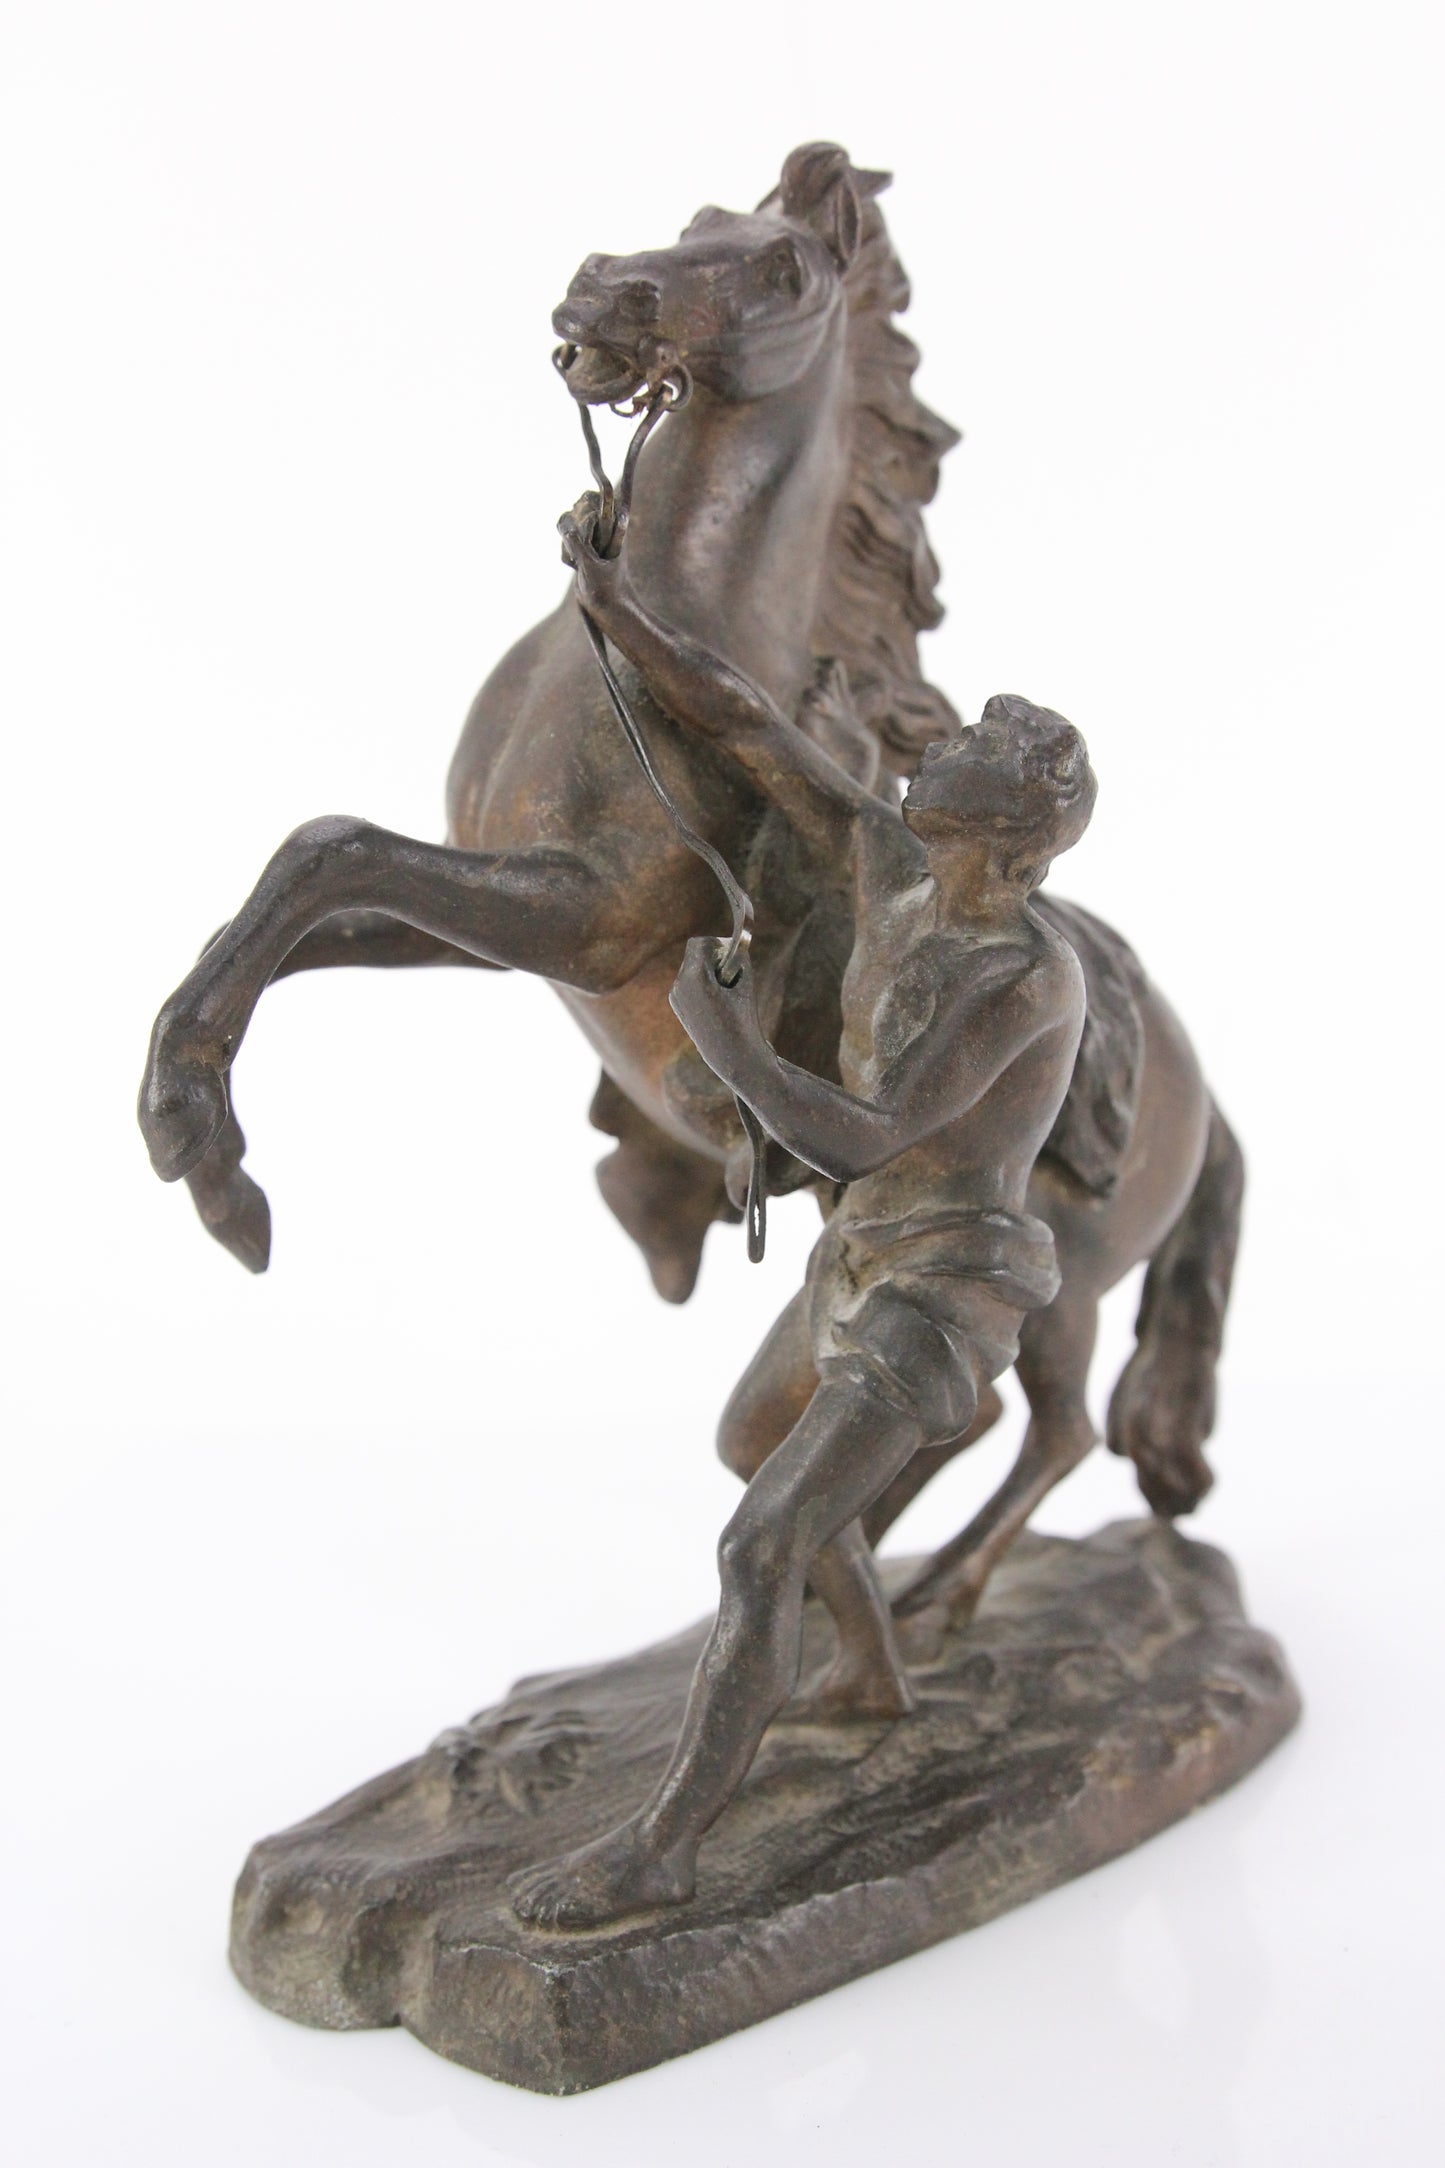 Antique Bronzed Metal Clock Topper Statue of Bucking Horse and Native Man